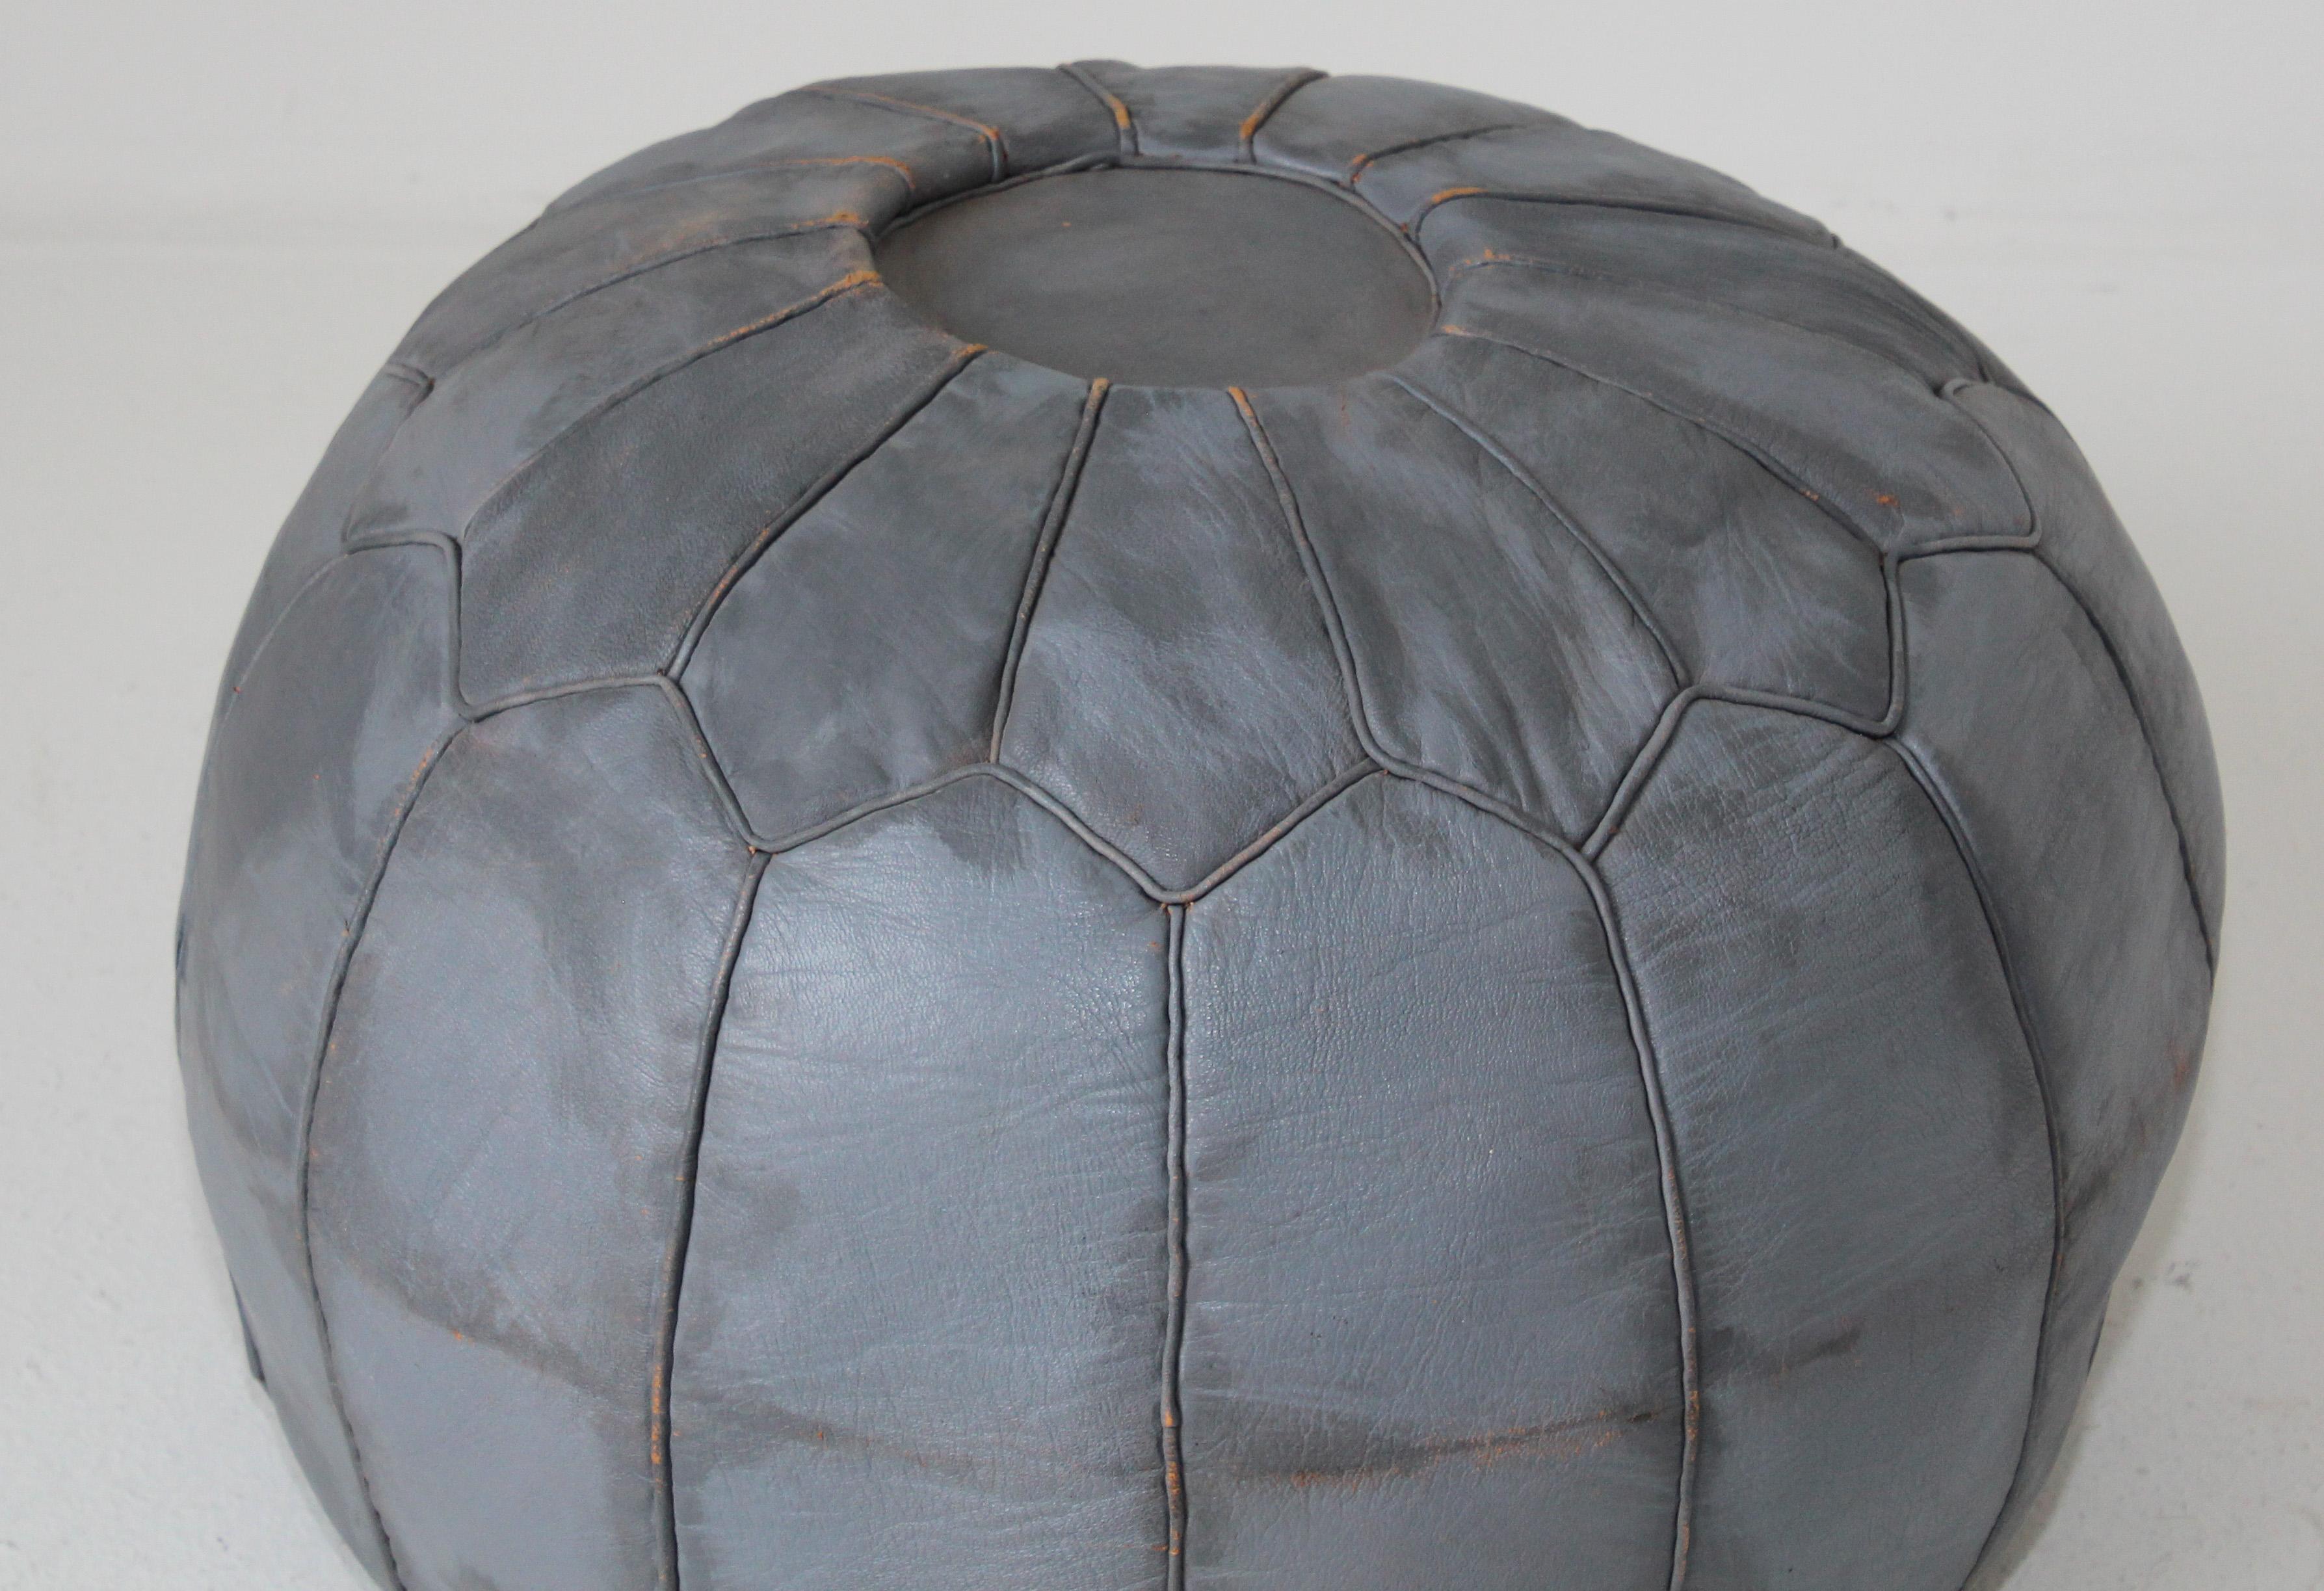 Vintage Moroccan grey leather round pouf hand tooled in Fez Morocco. 
Foot stool, ottoman handcrafted by Moroccan artisans. 
Size is 19 in diameter x 12.5 in height.
Vintage Bohemian style, circa 1960-70's.
Handmade with no zipper but with holes